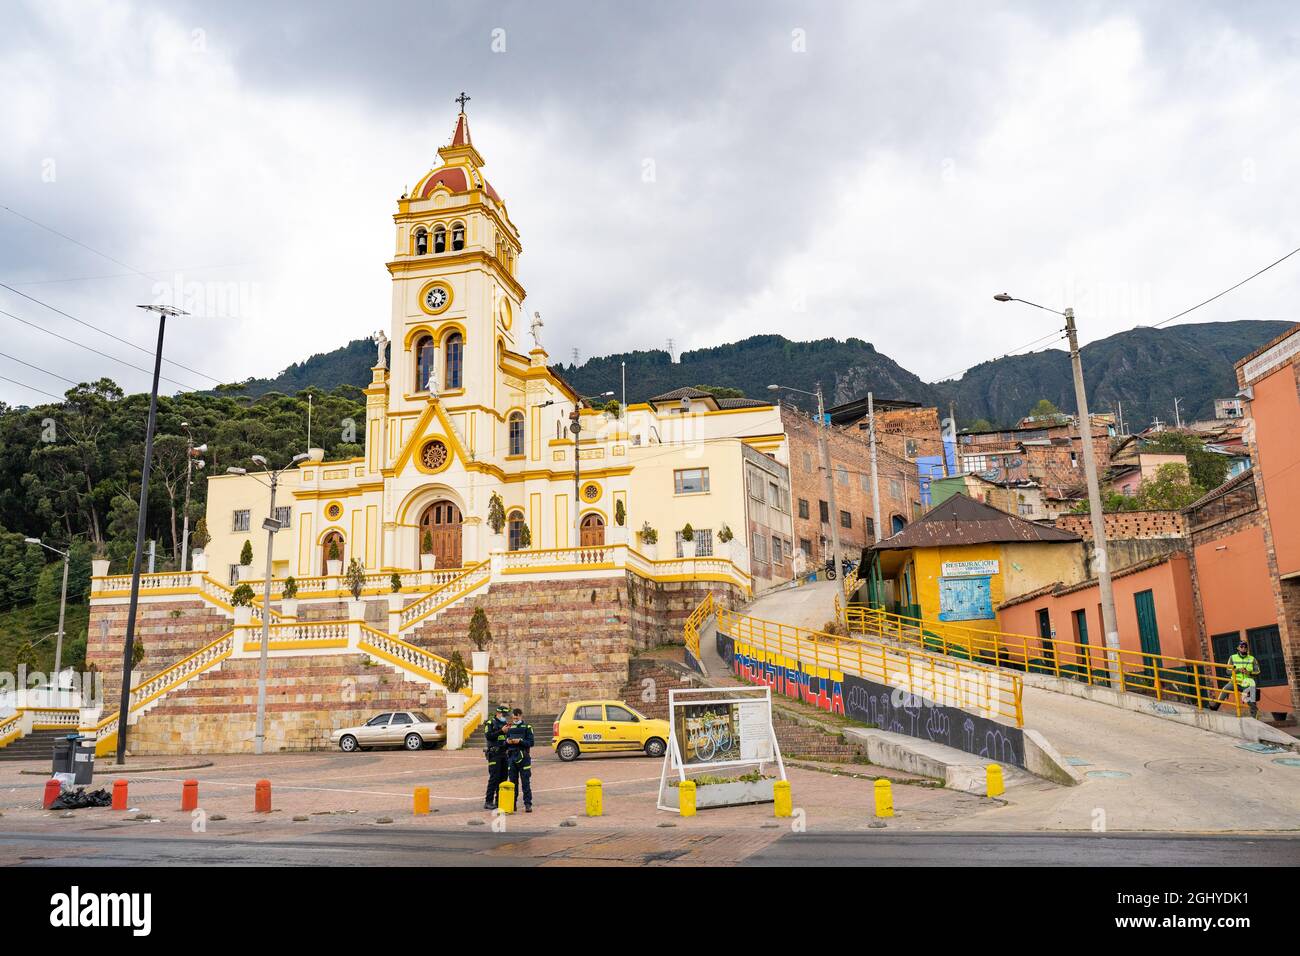 Bogota, Colombia, September 4, 2021, the Egipto district. The Church of Our Lady of Egypt. Stock Photo